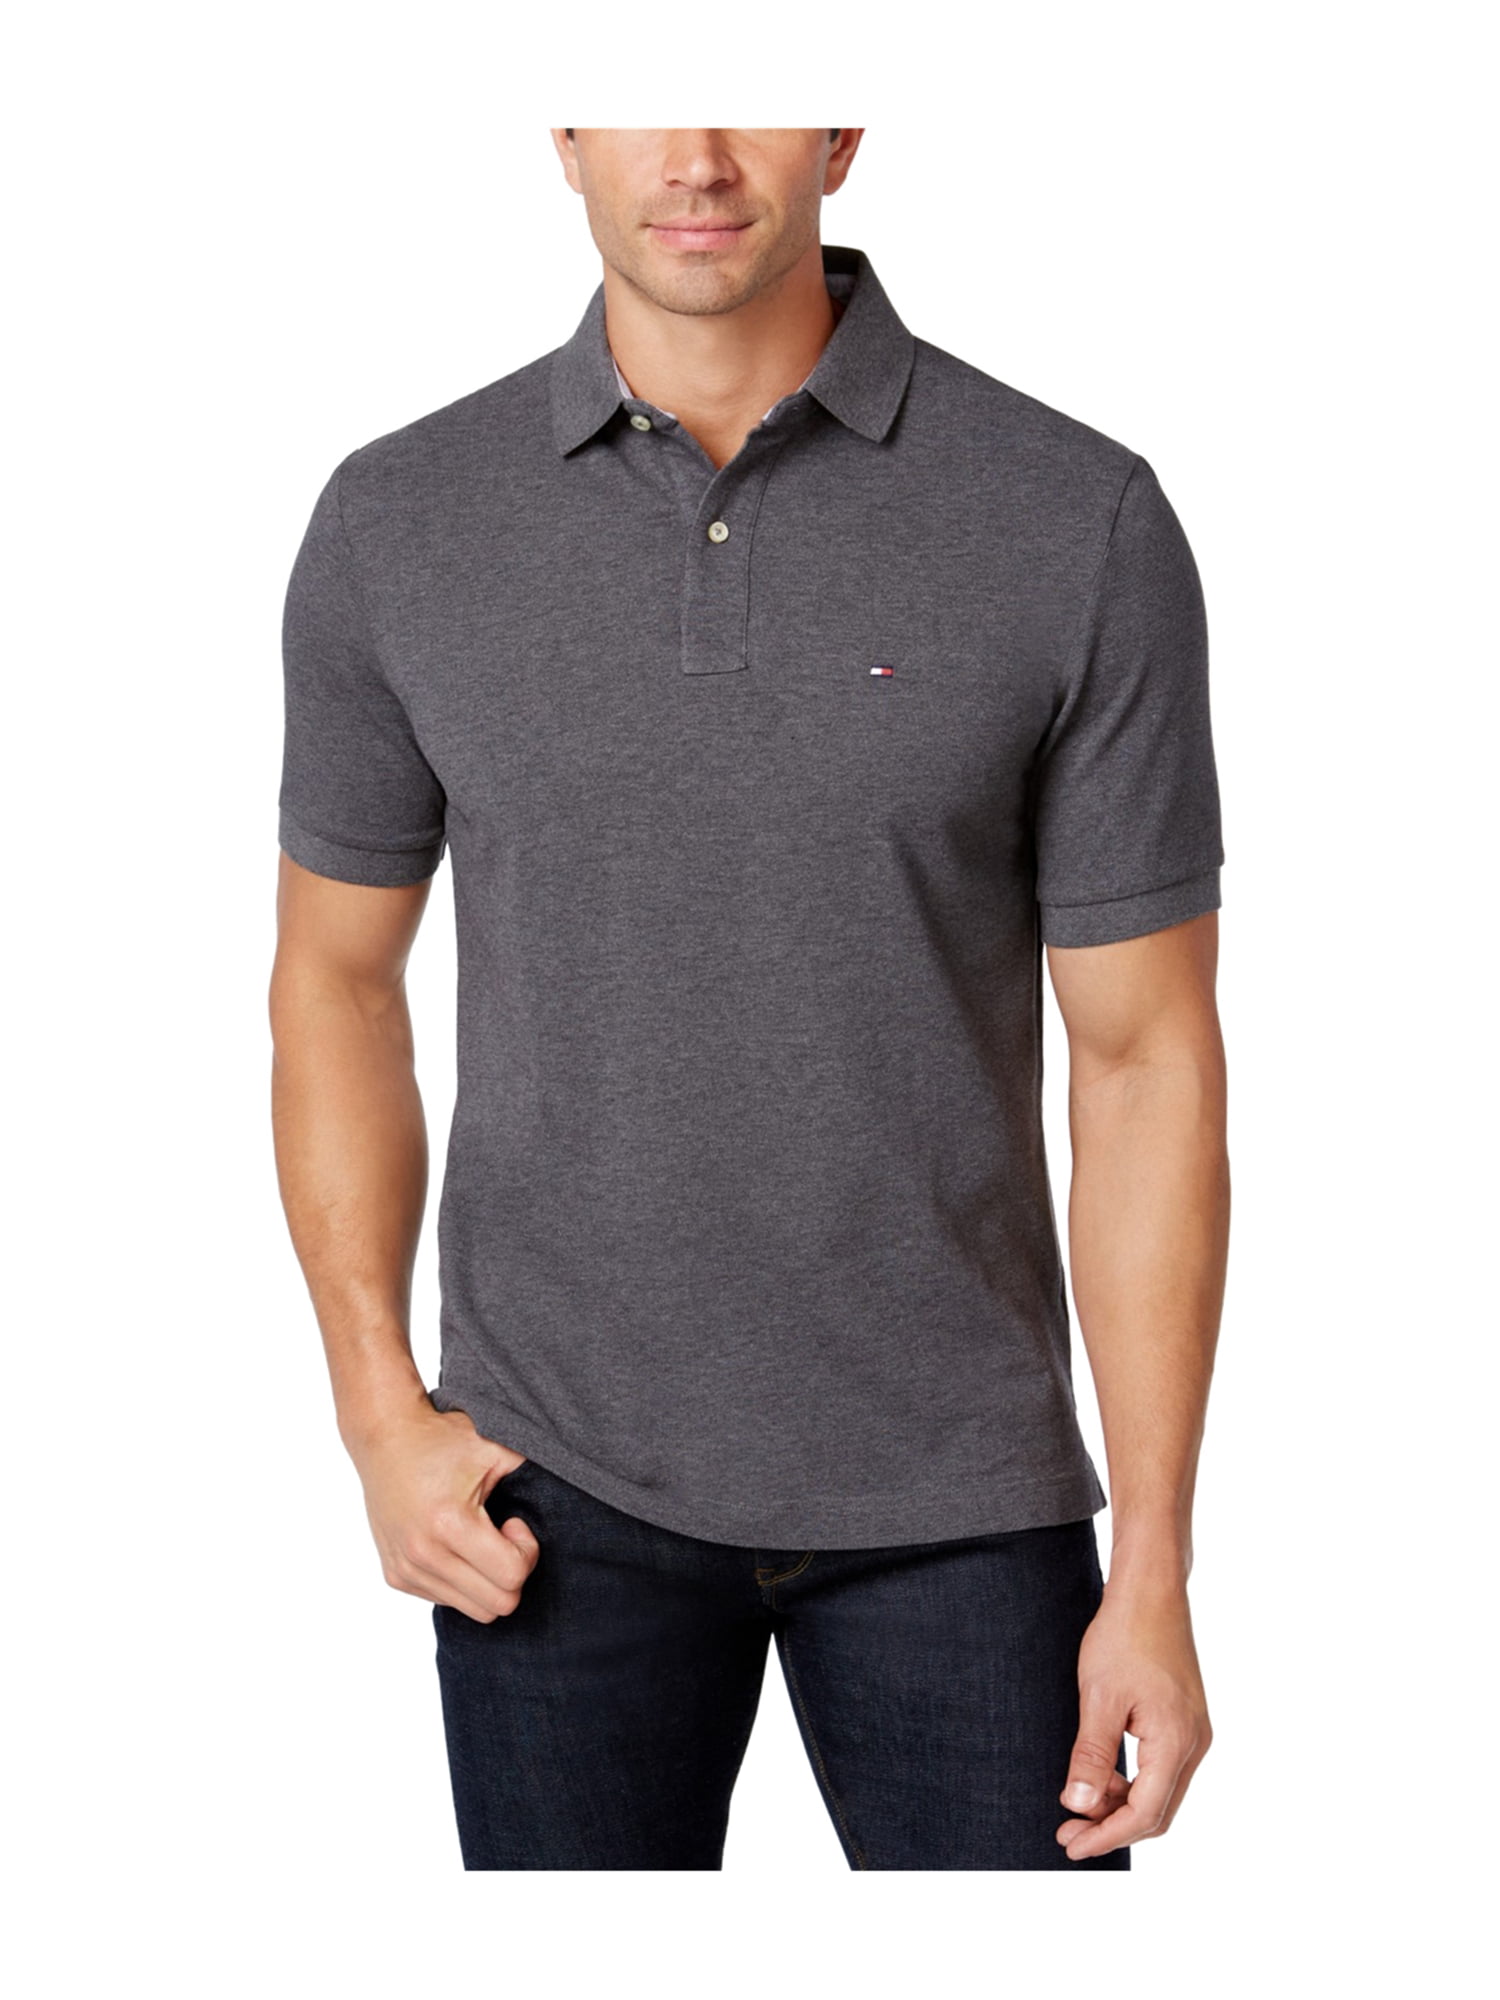 Tommy Hilfiger Mens Solid Ivy Rugby Polo Shirt - Walmart.com